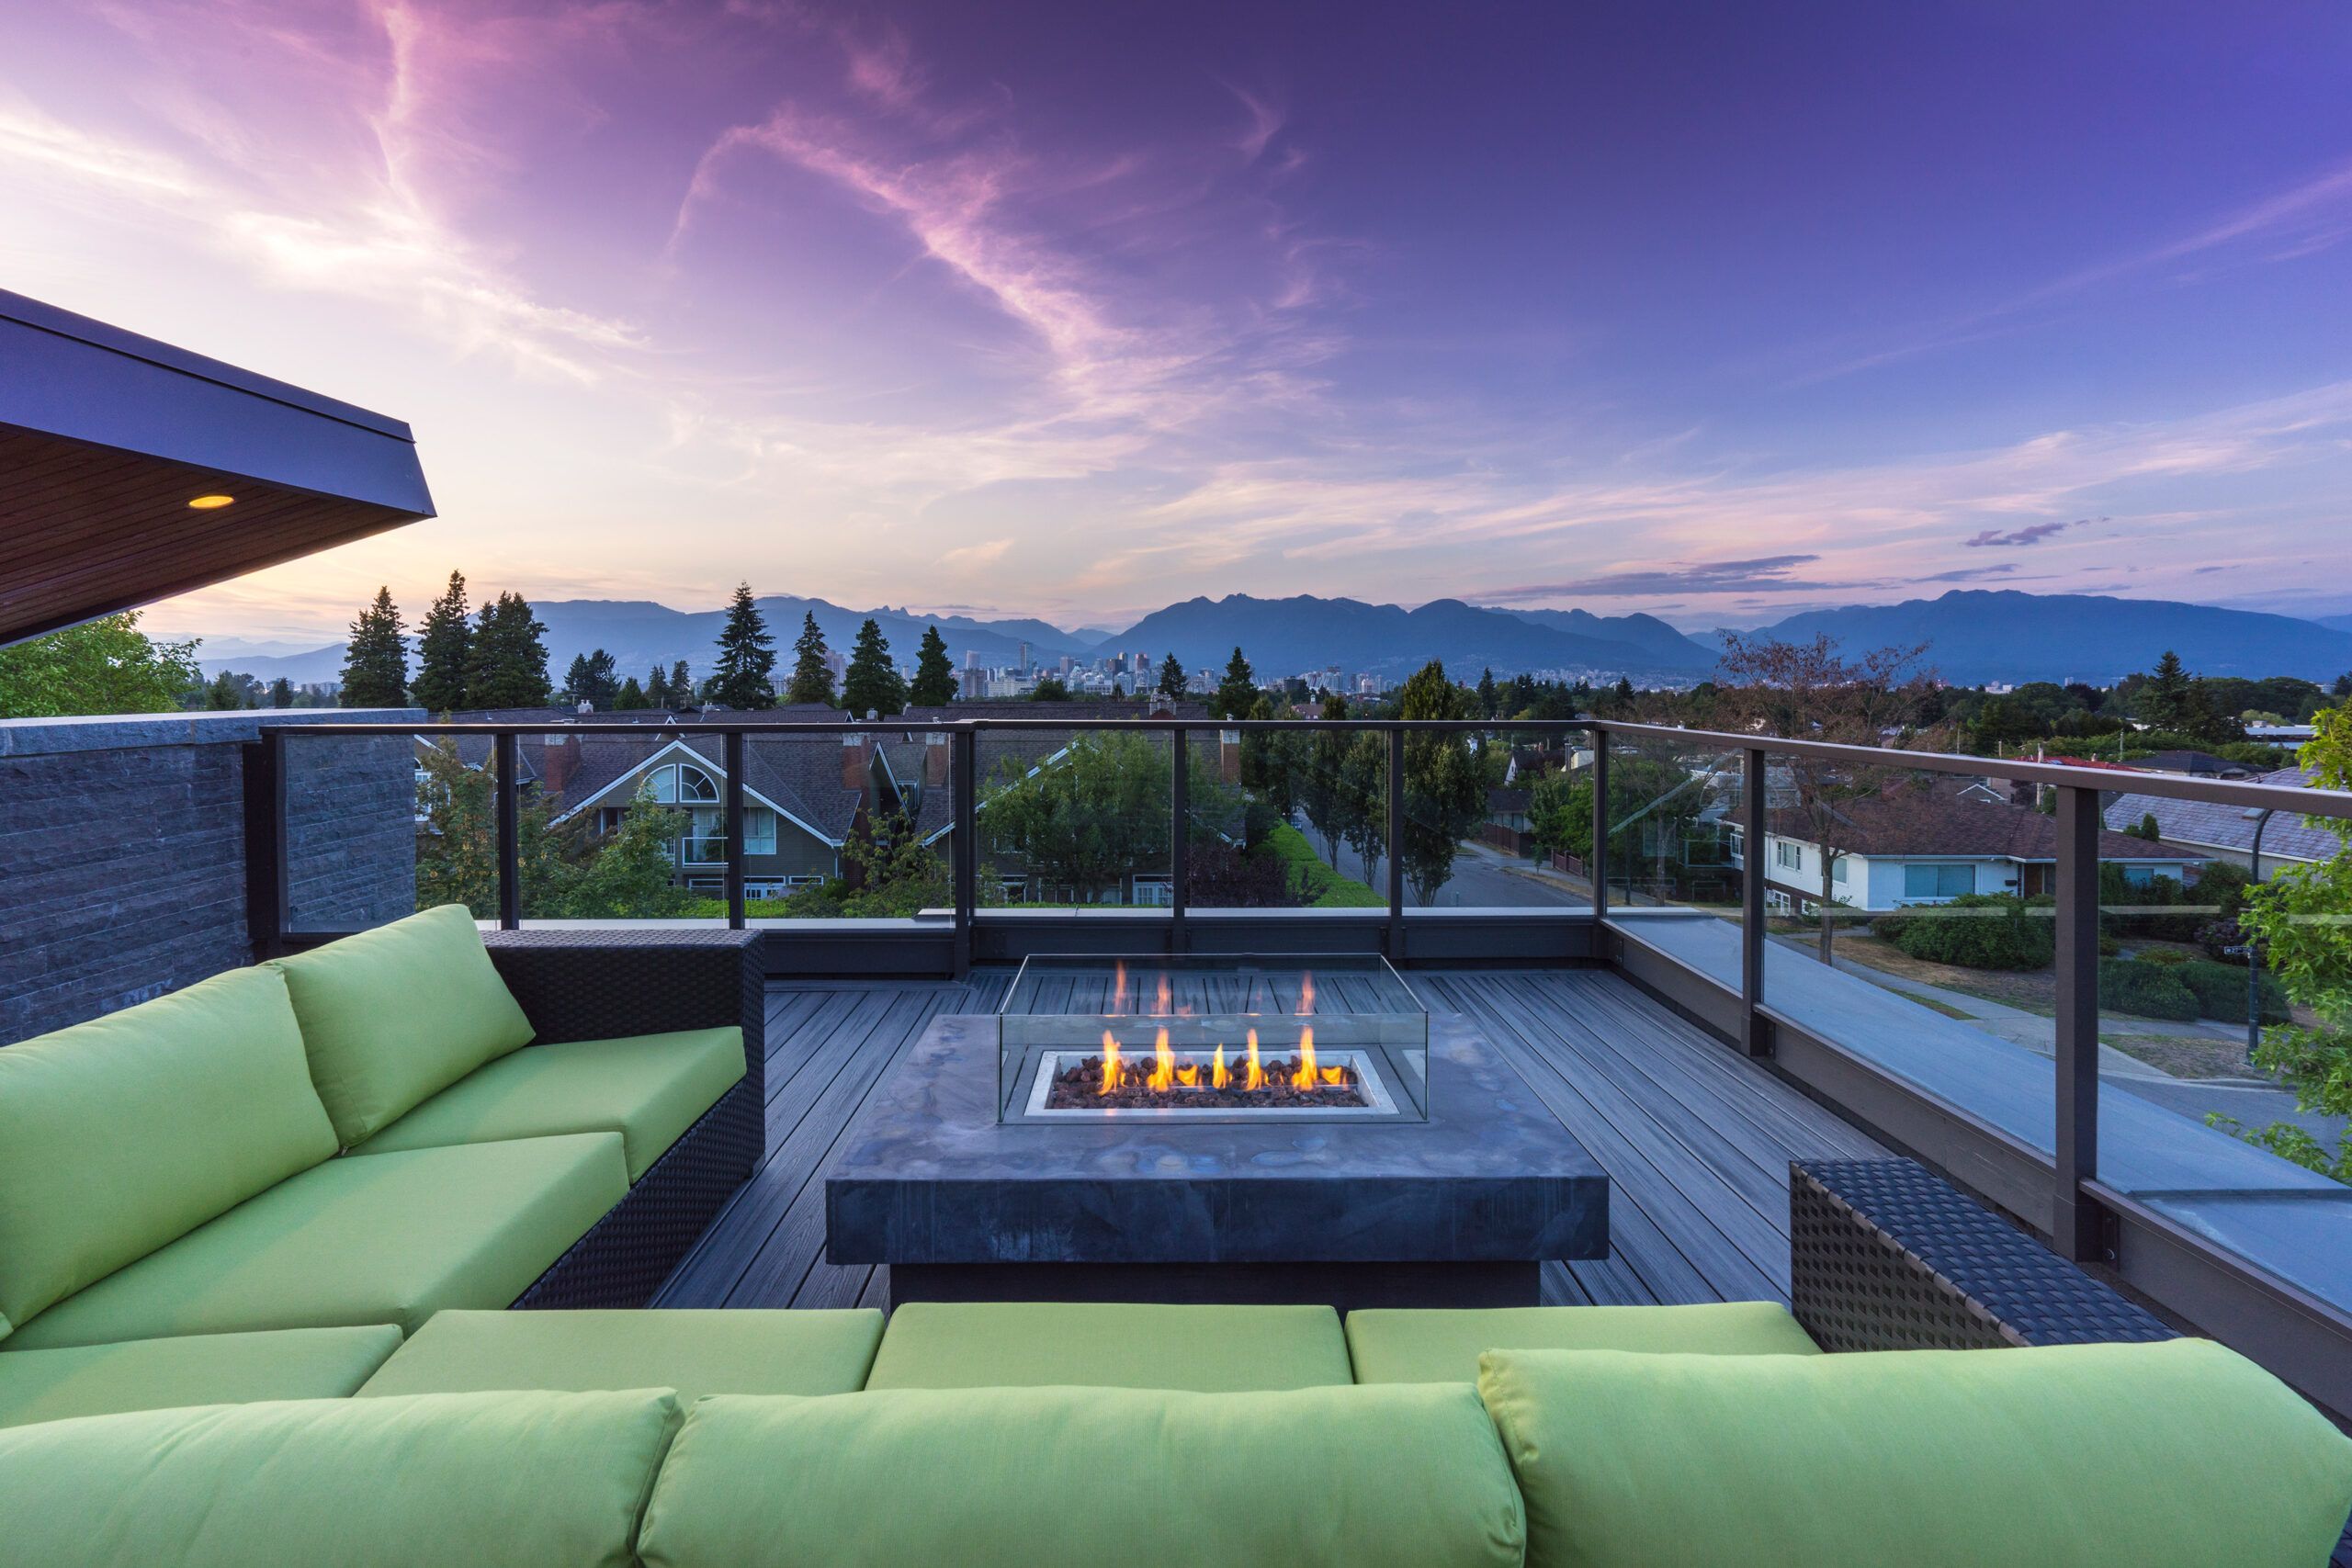 11 inspiring roof deck ideas and designs - this old house